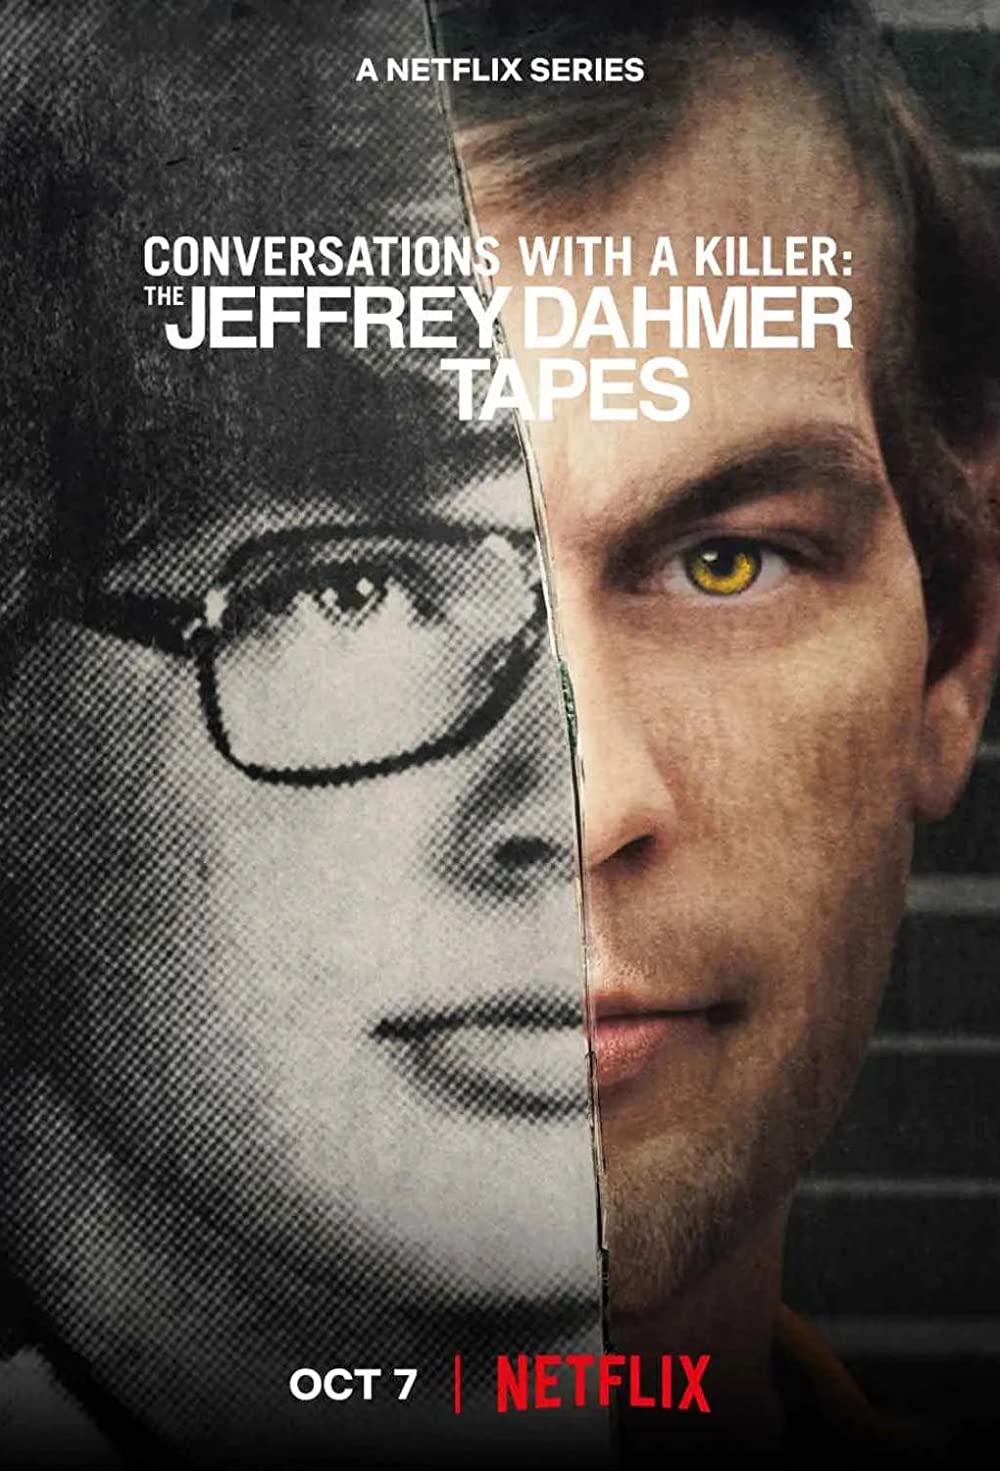 Conversations with a Killer: The Jeffrey Dahmer Tapes - Season 1